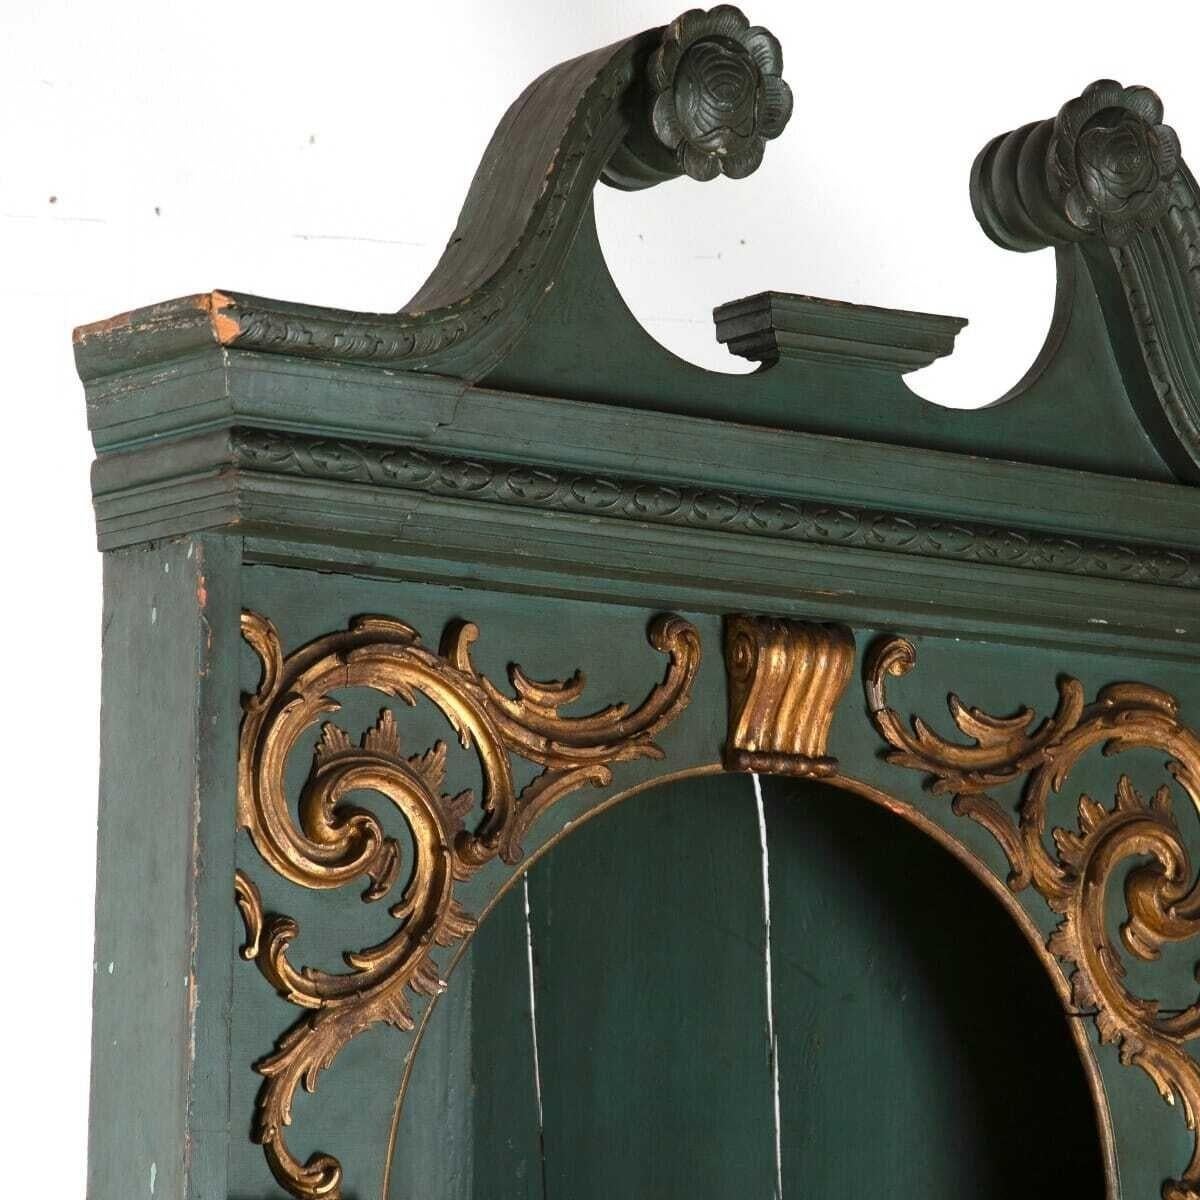 Large 18th Century painted and gilded corner cupboard. Some very nice features on this corner cupboard including Corinthian columns and swan neck pediment. All the gilded timber is carved wood. A wonderful and rare piece of furniture.